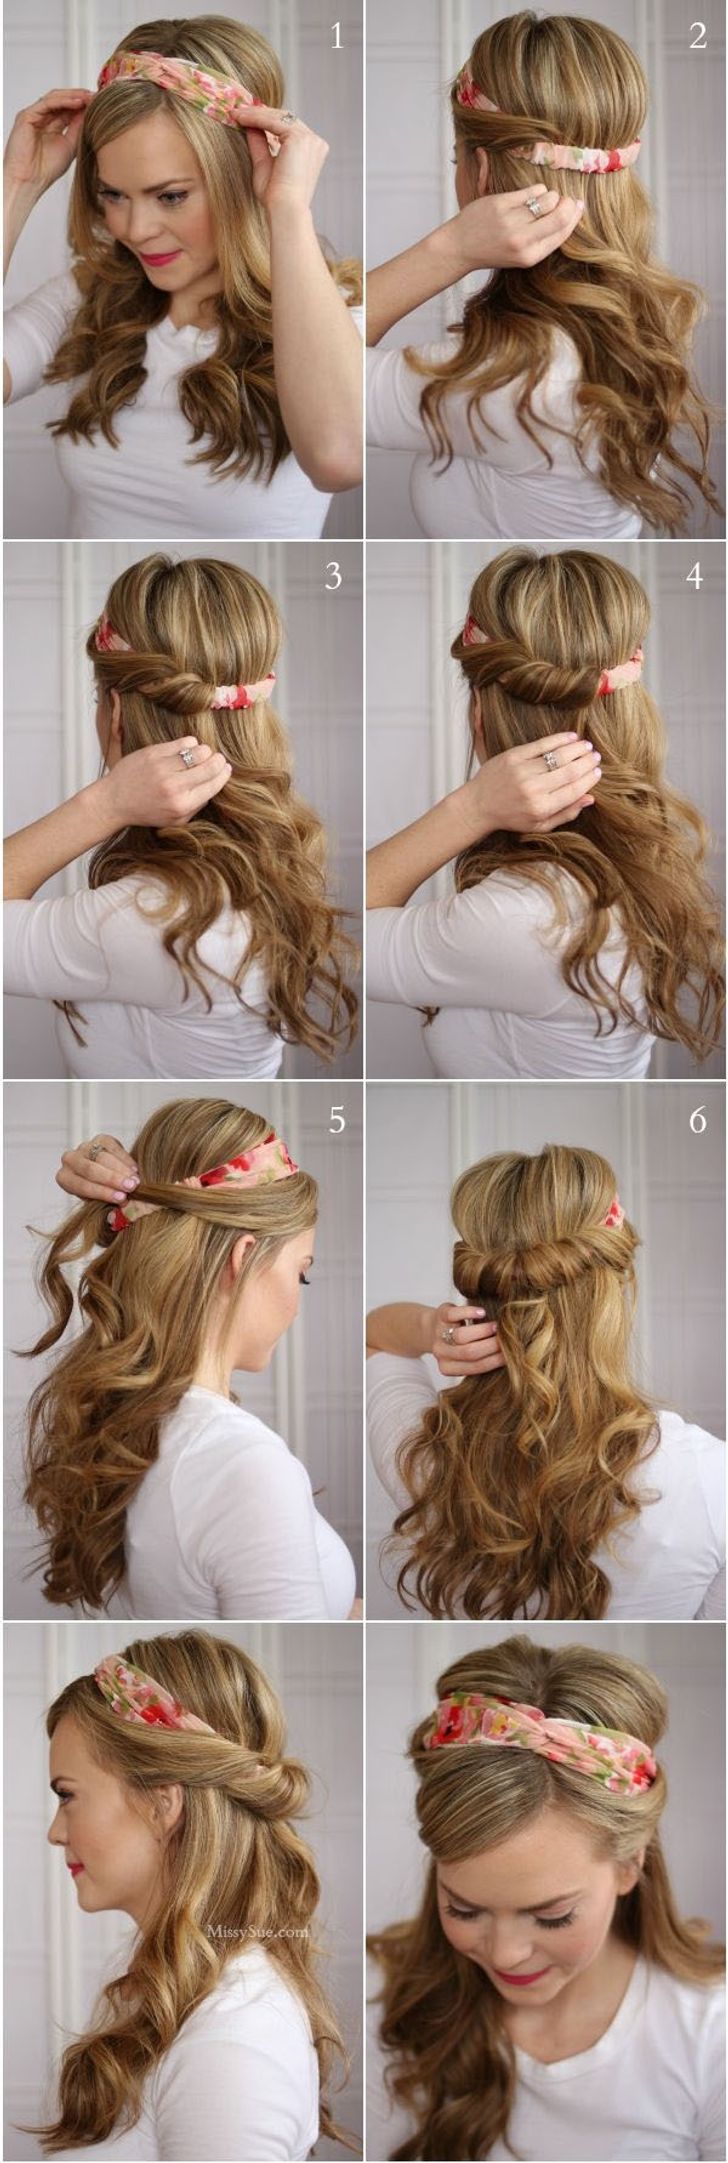 14 Hairstyles That Can Be Done in 3 Minutes